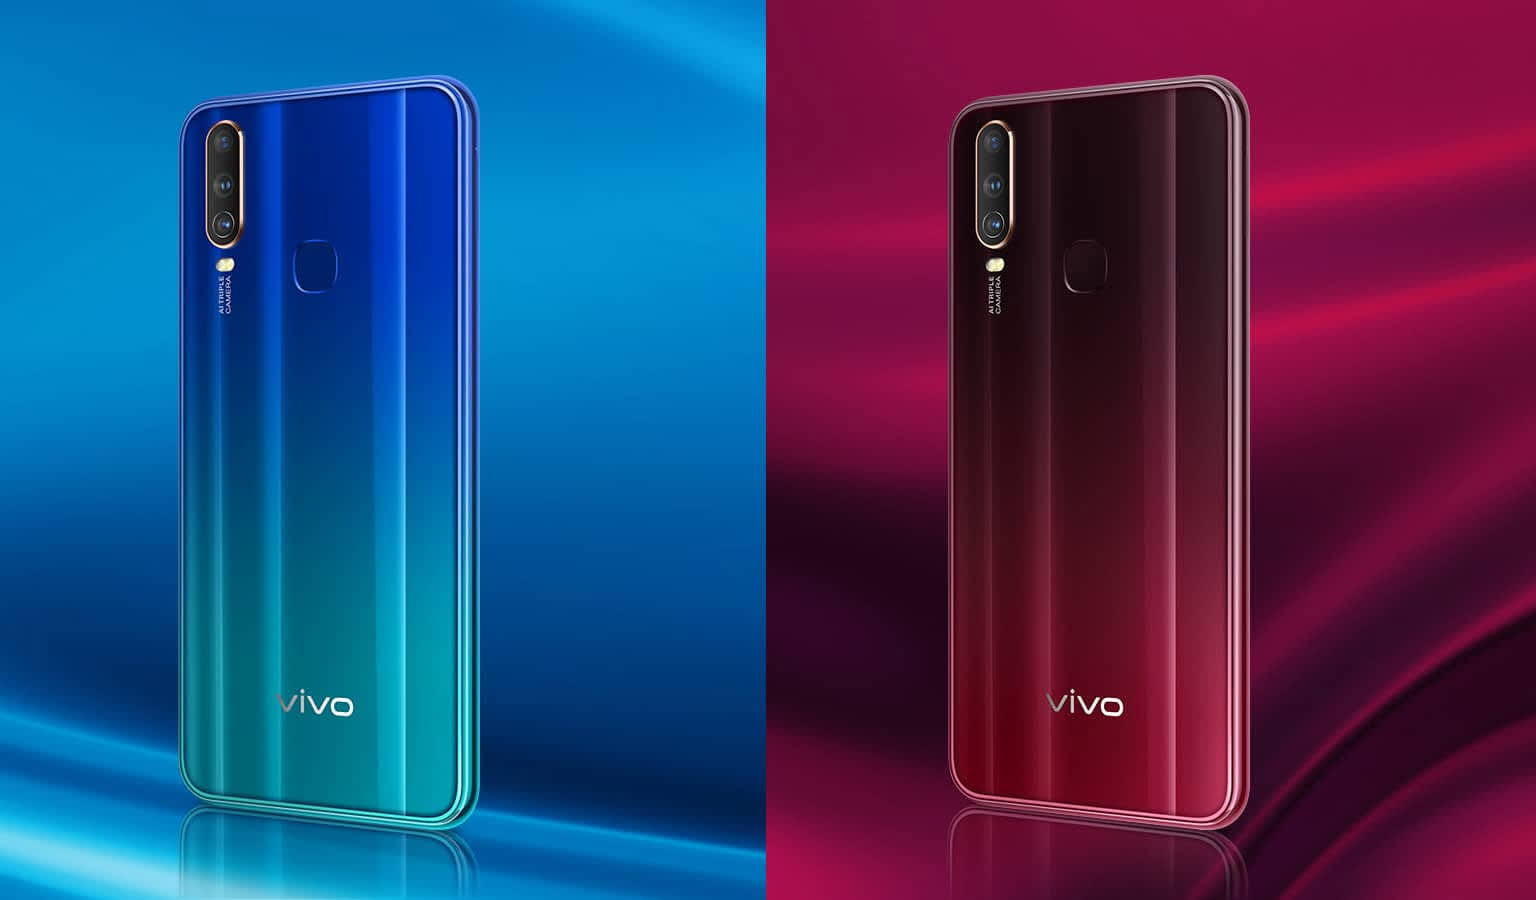 How To Download Firmware For Vivo Y12?